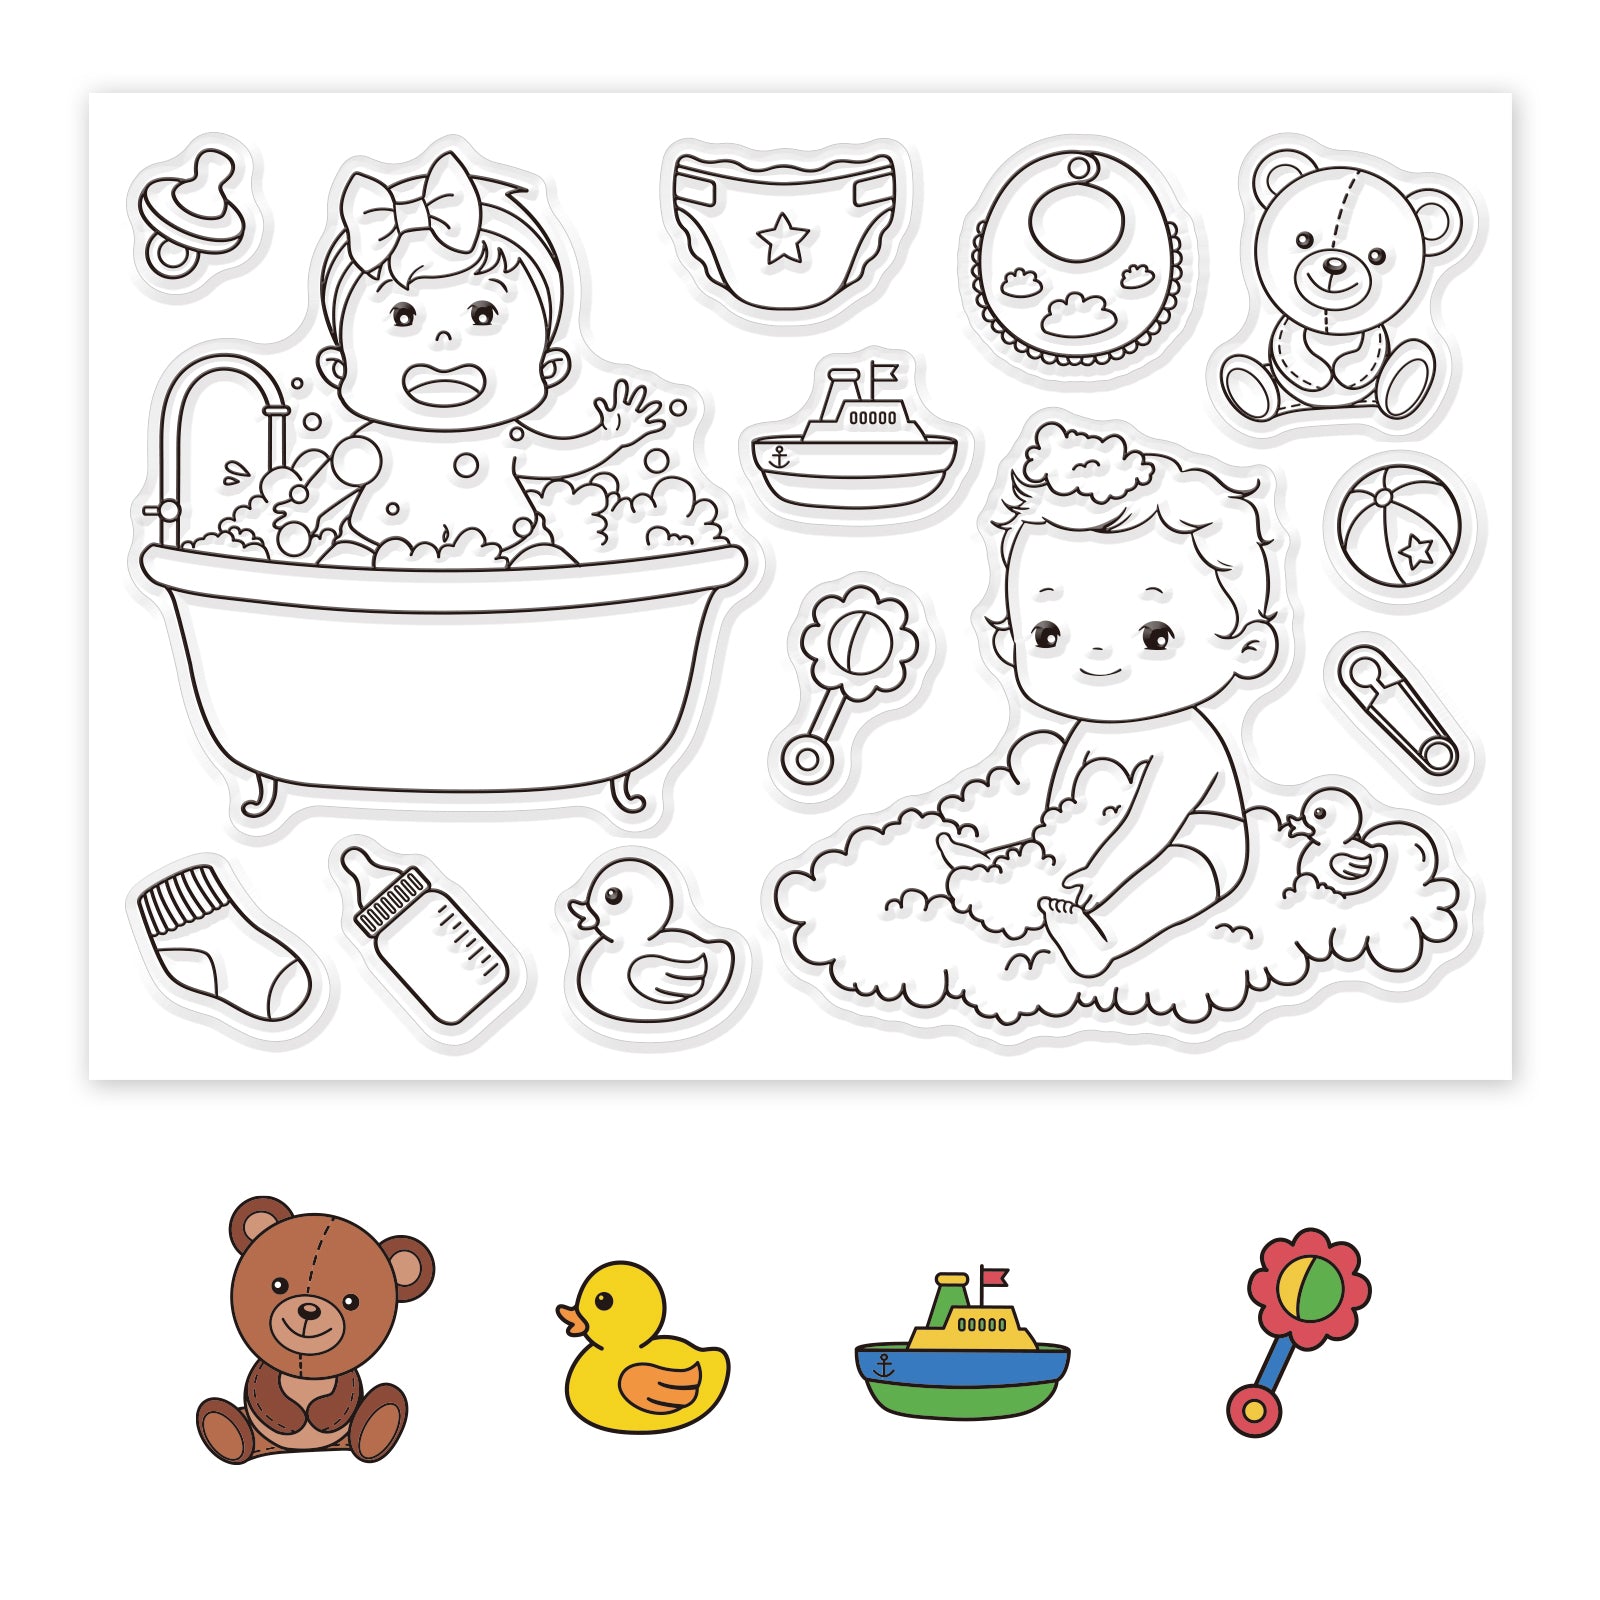 Globleland Teddy Bear, Feeding Bottle, Toy Duck, Socks, Diapers, Toy Sailboat, Pacifier Clear Silicone Stamp Seal for Card Making Decoration and DIY Scrapbooking